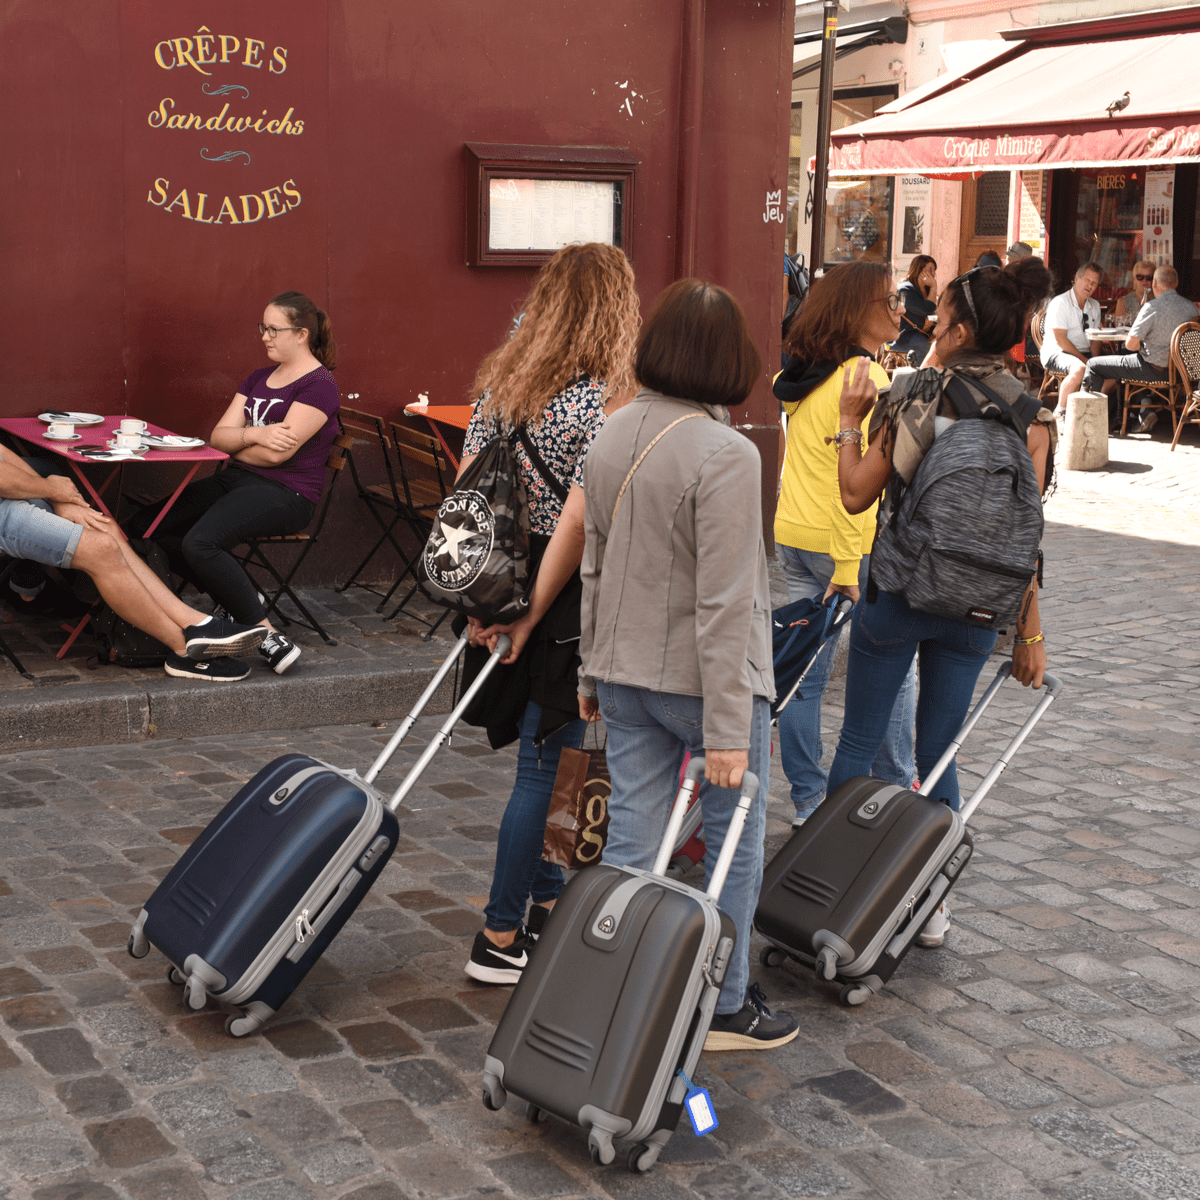 Tourists with luggage in Montmartre, Paris.